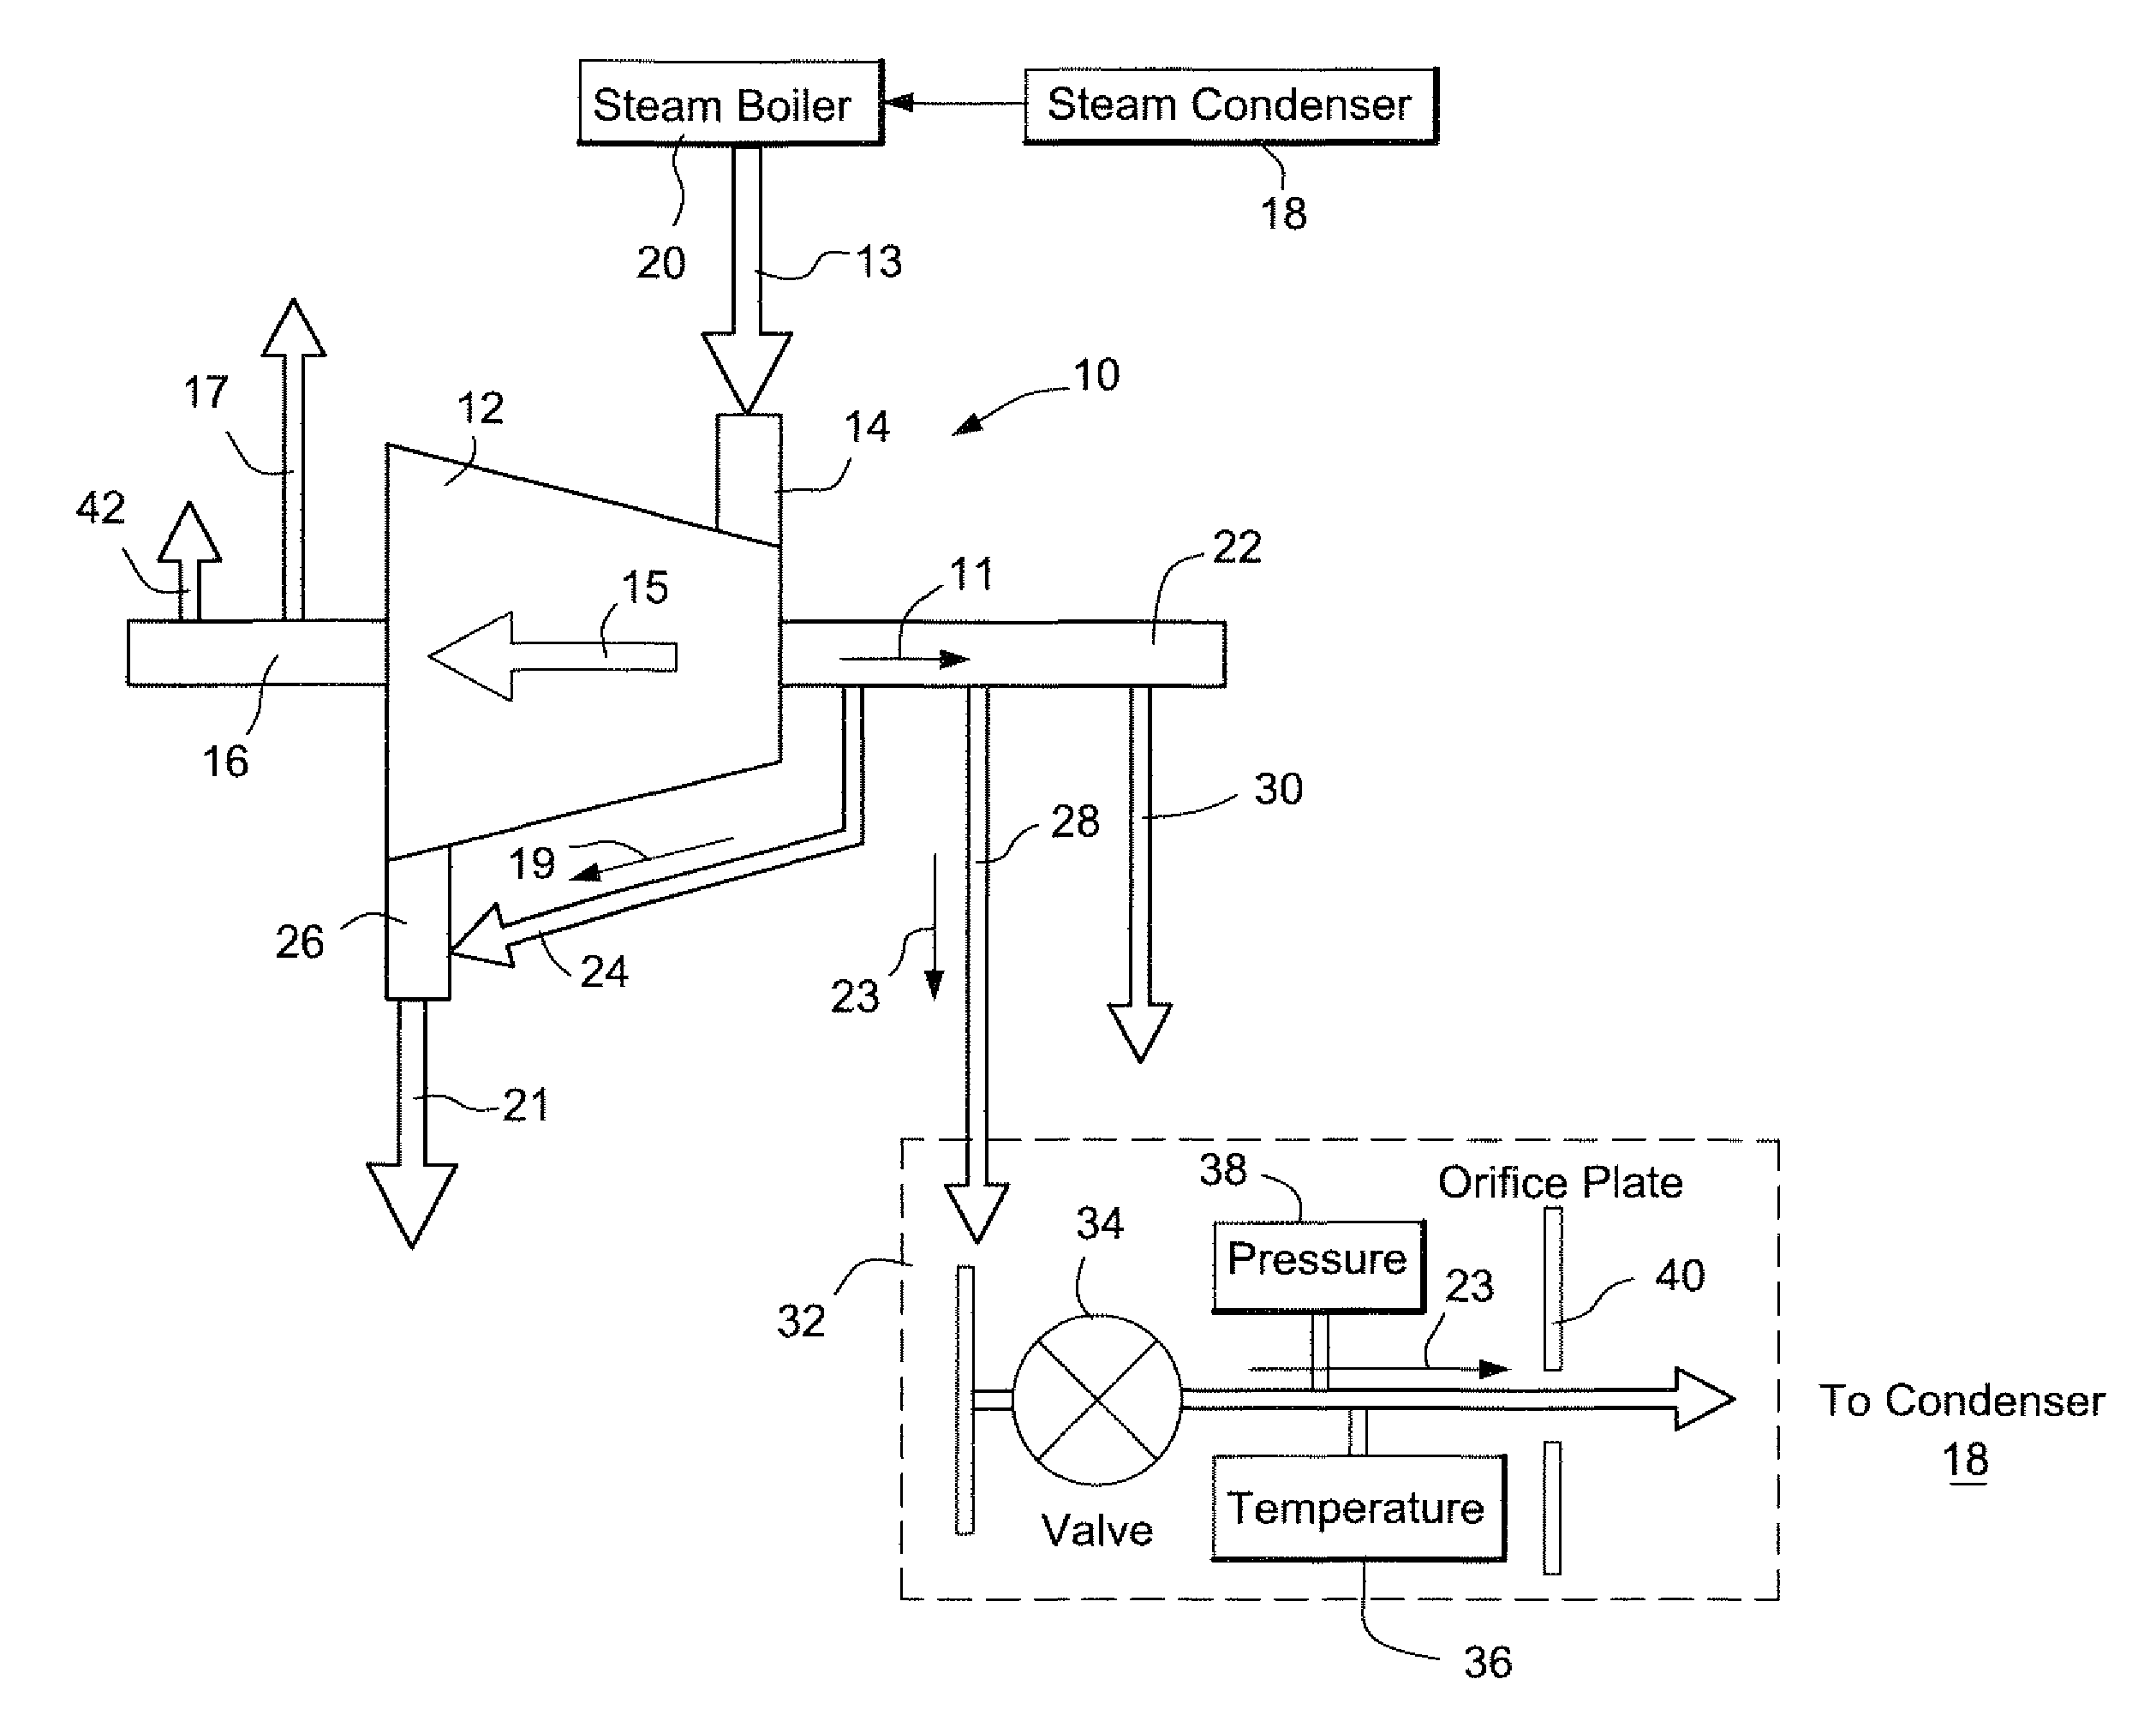 Method for determining steampath efficiency of a steam turbine section with internal leakage